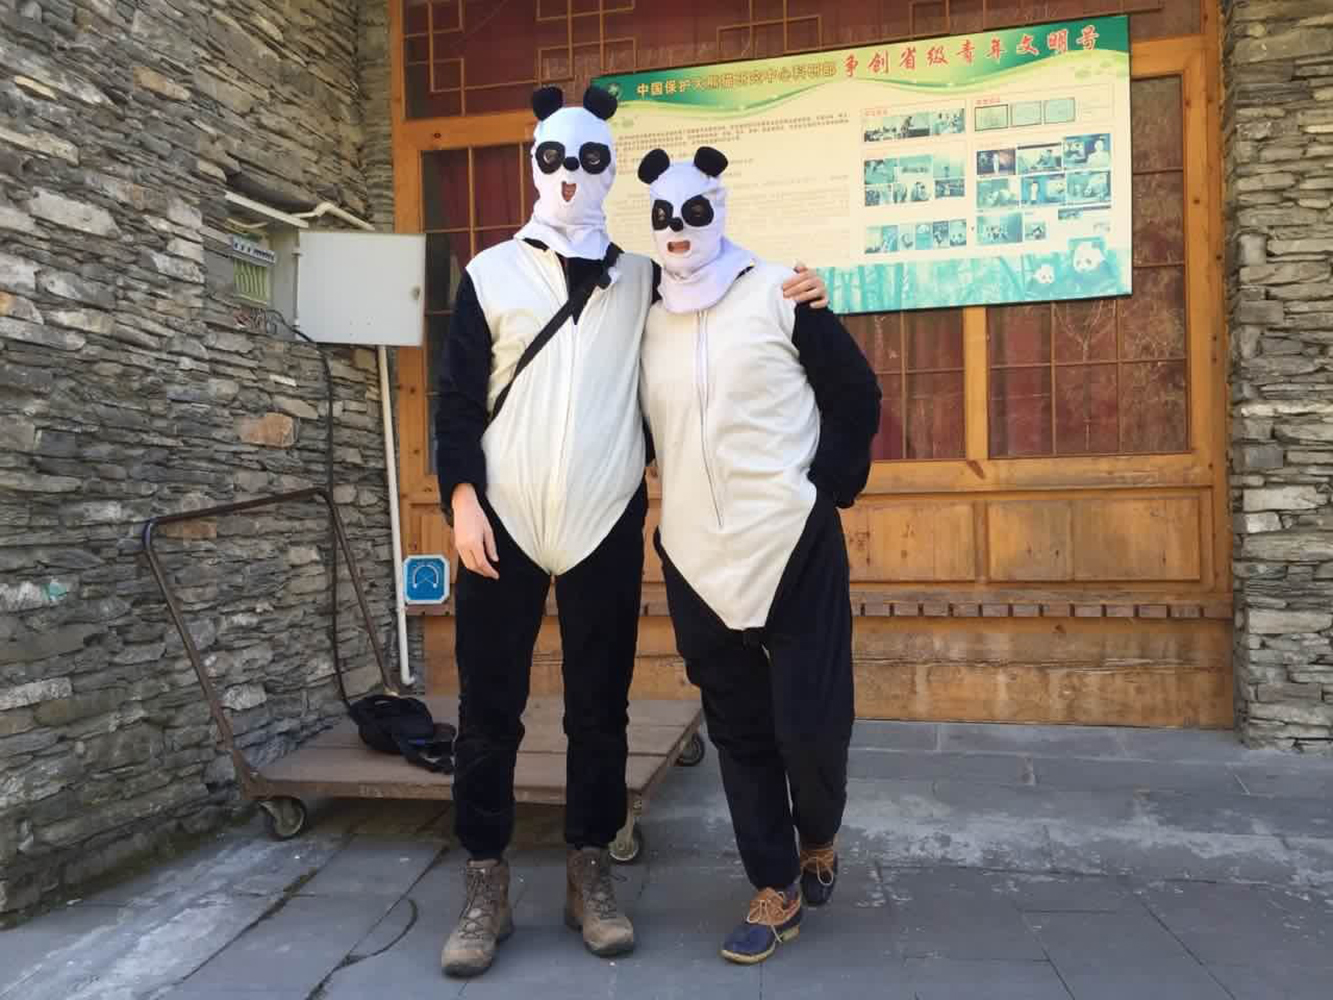 Photographer Adam Dean and TIME East Asia bureau chief Hannah Beech wearing panda costumes while they report on the pandas at the Hetaoping Research and Conservation Center for the Giant Panda in Wolong National Natural Reserve, Sichuan province, China, on Dec. 1, 2015 (Gu Yongqiang)